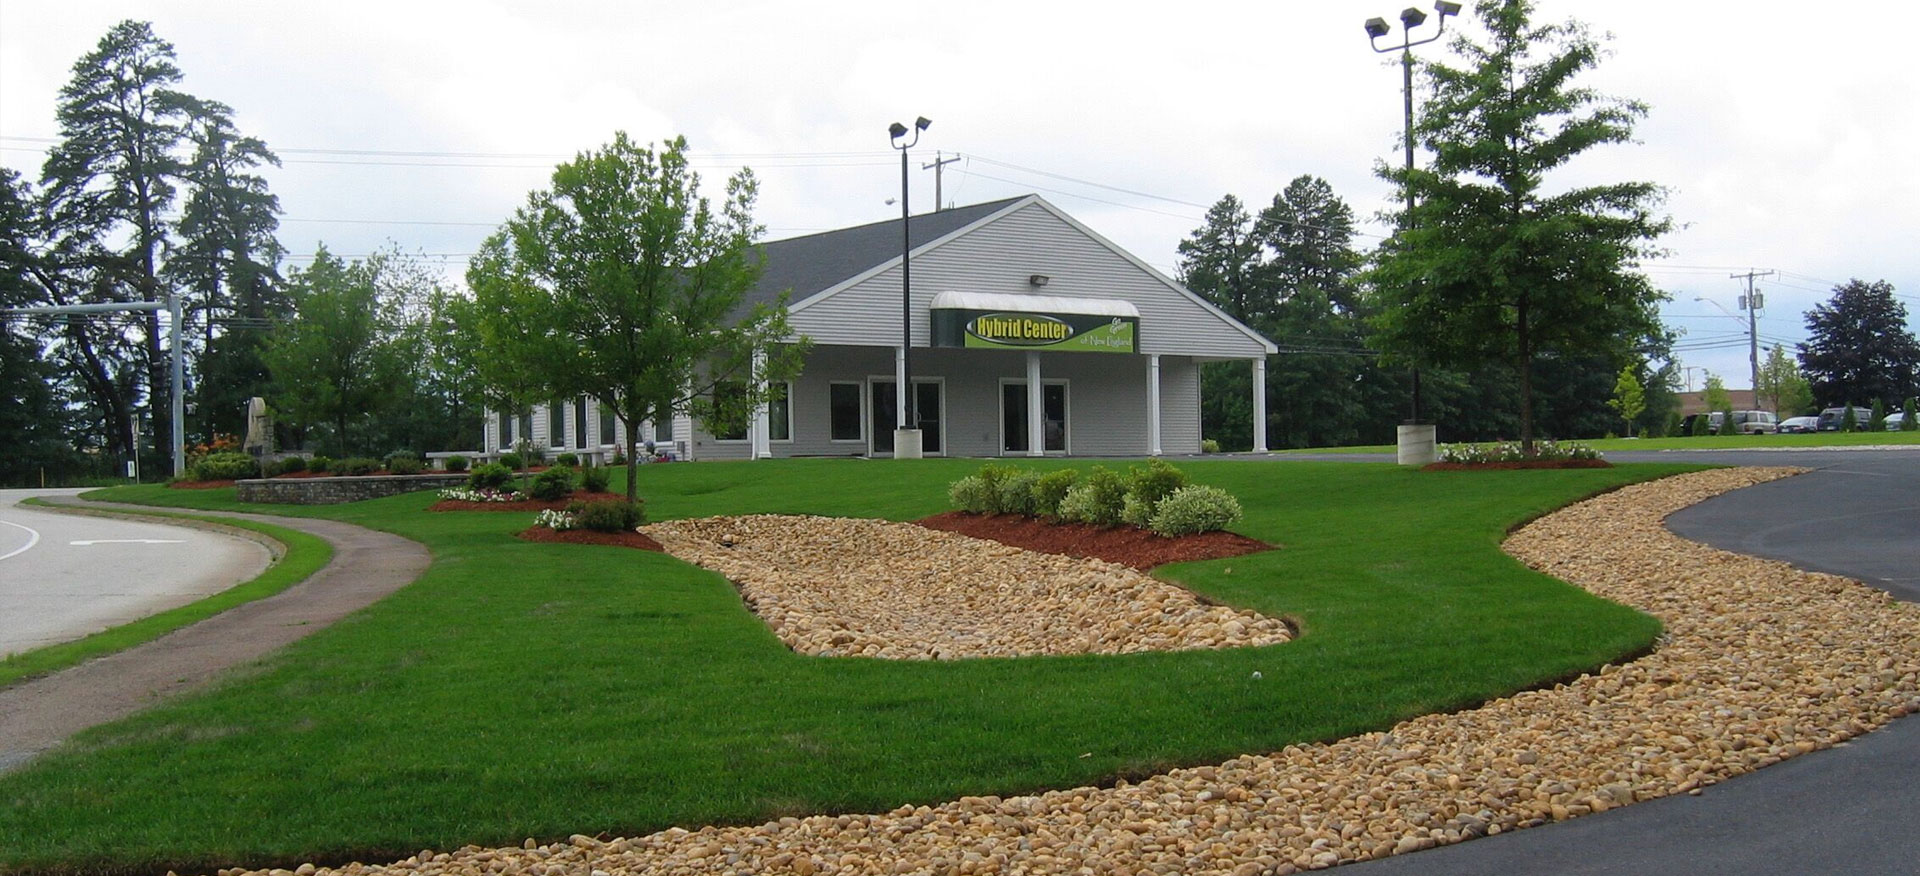 Commercial Lanscaping, Snow Removal and Maintenance